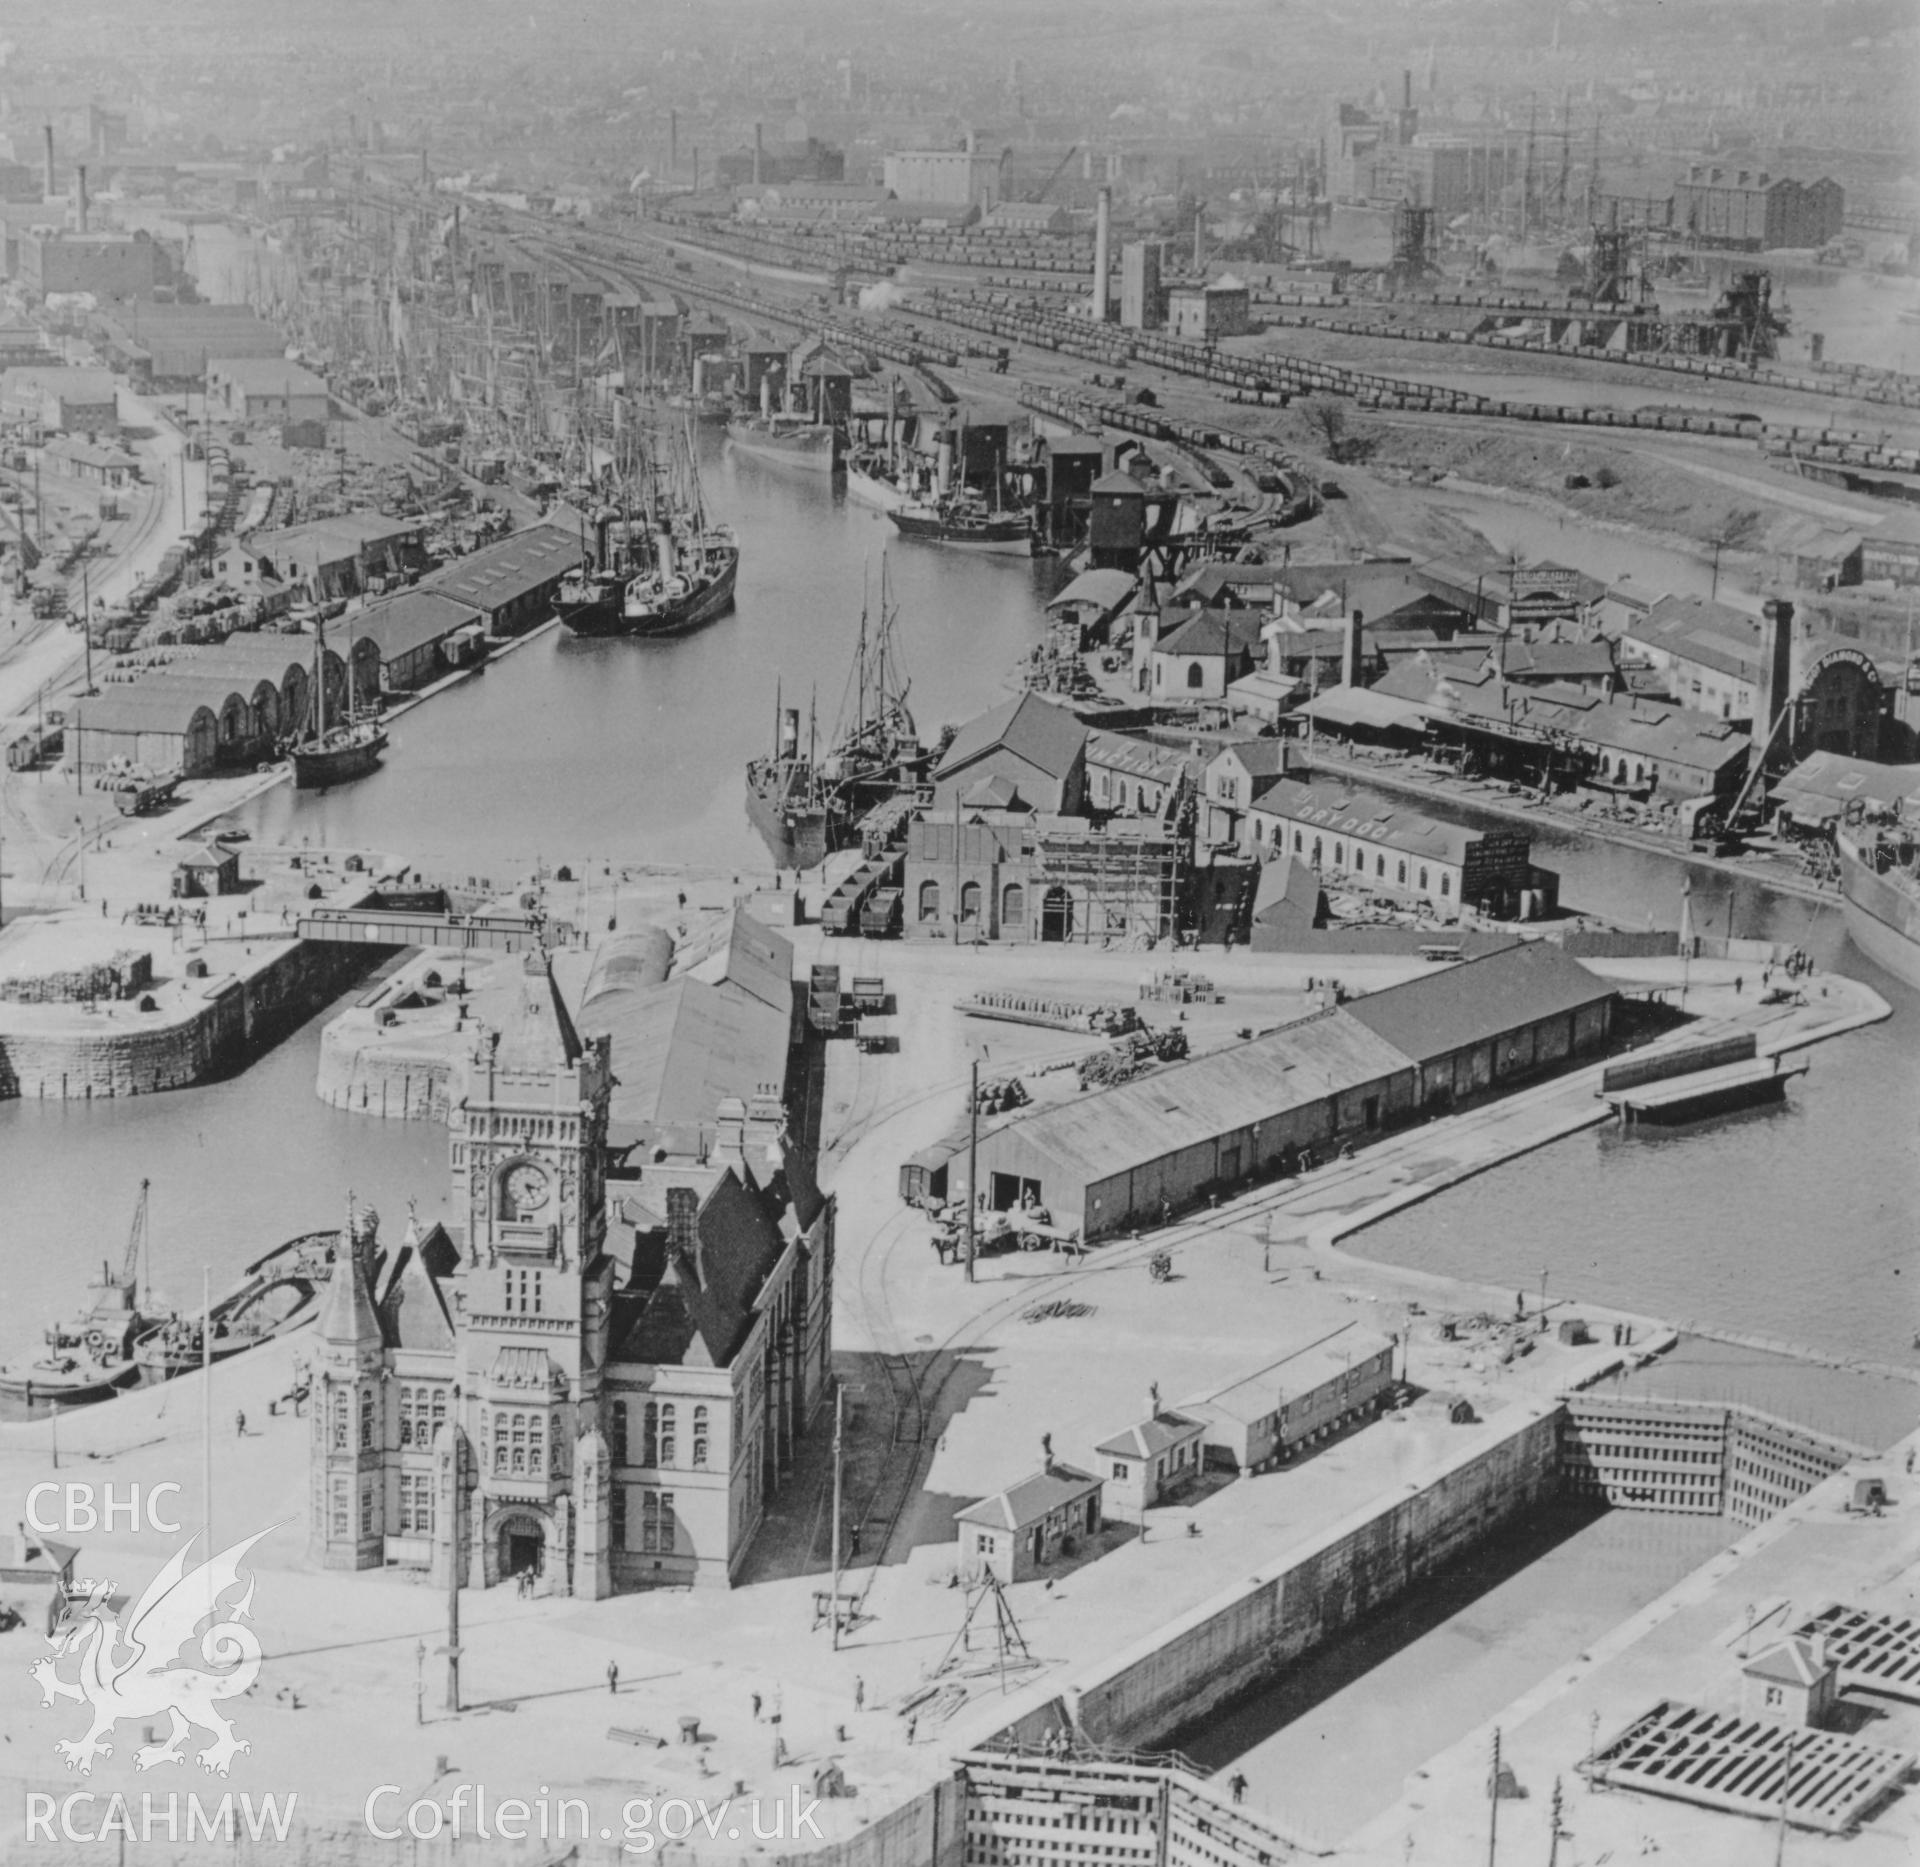 Early aerial photograph of Cardiff Docks.